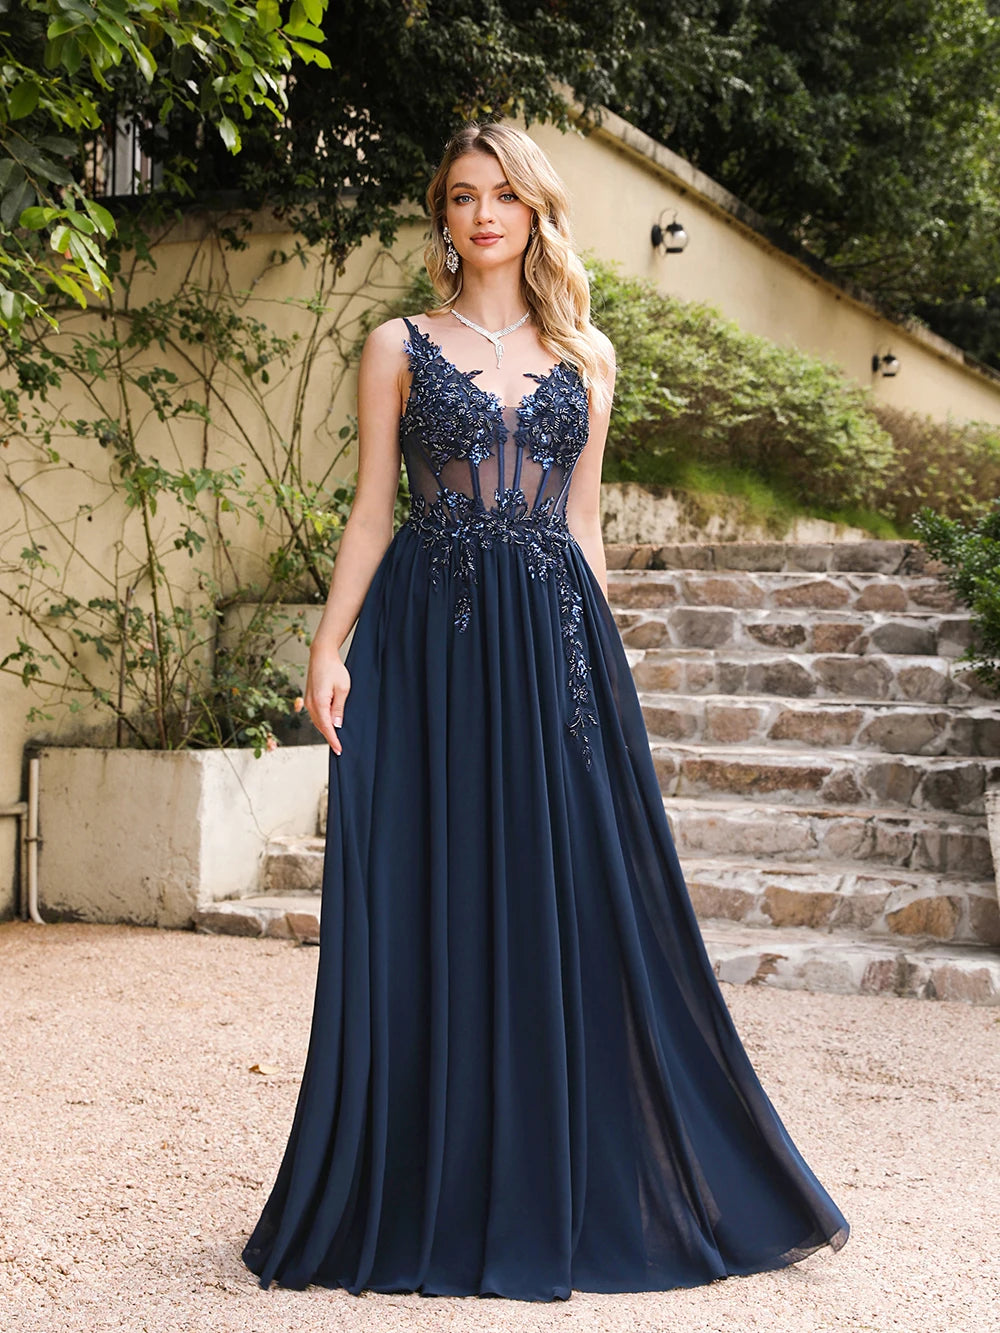 Tulle A-Line Ball Dress in Navy Blue